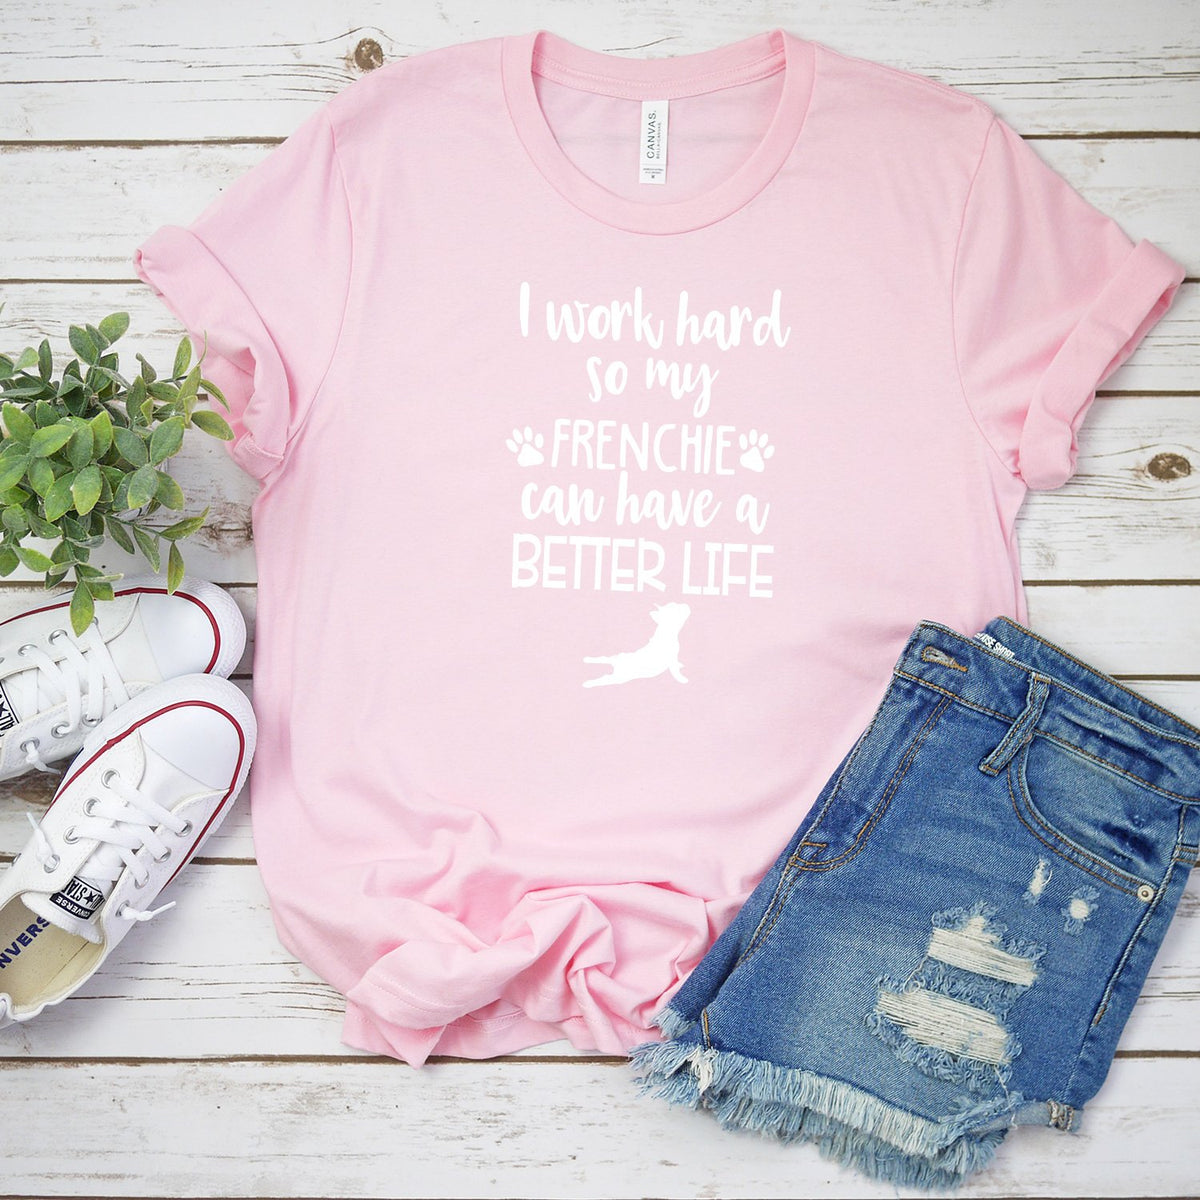 I Work Hard So My Frenchie Can Have A Better Life - Short Sleeve Tee Shirt